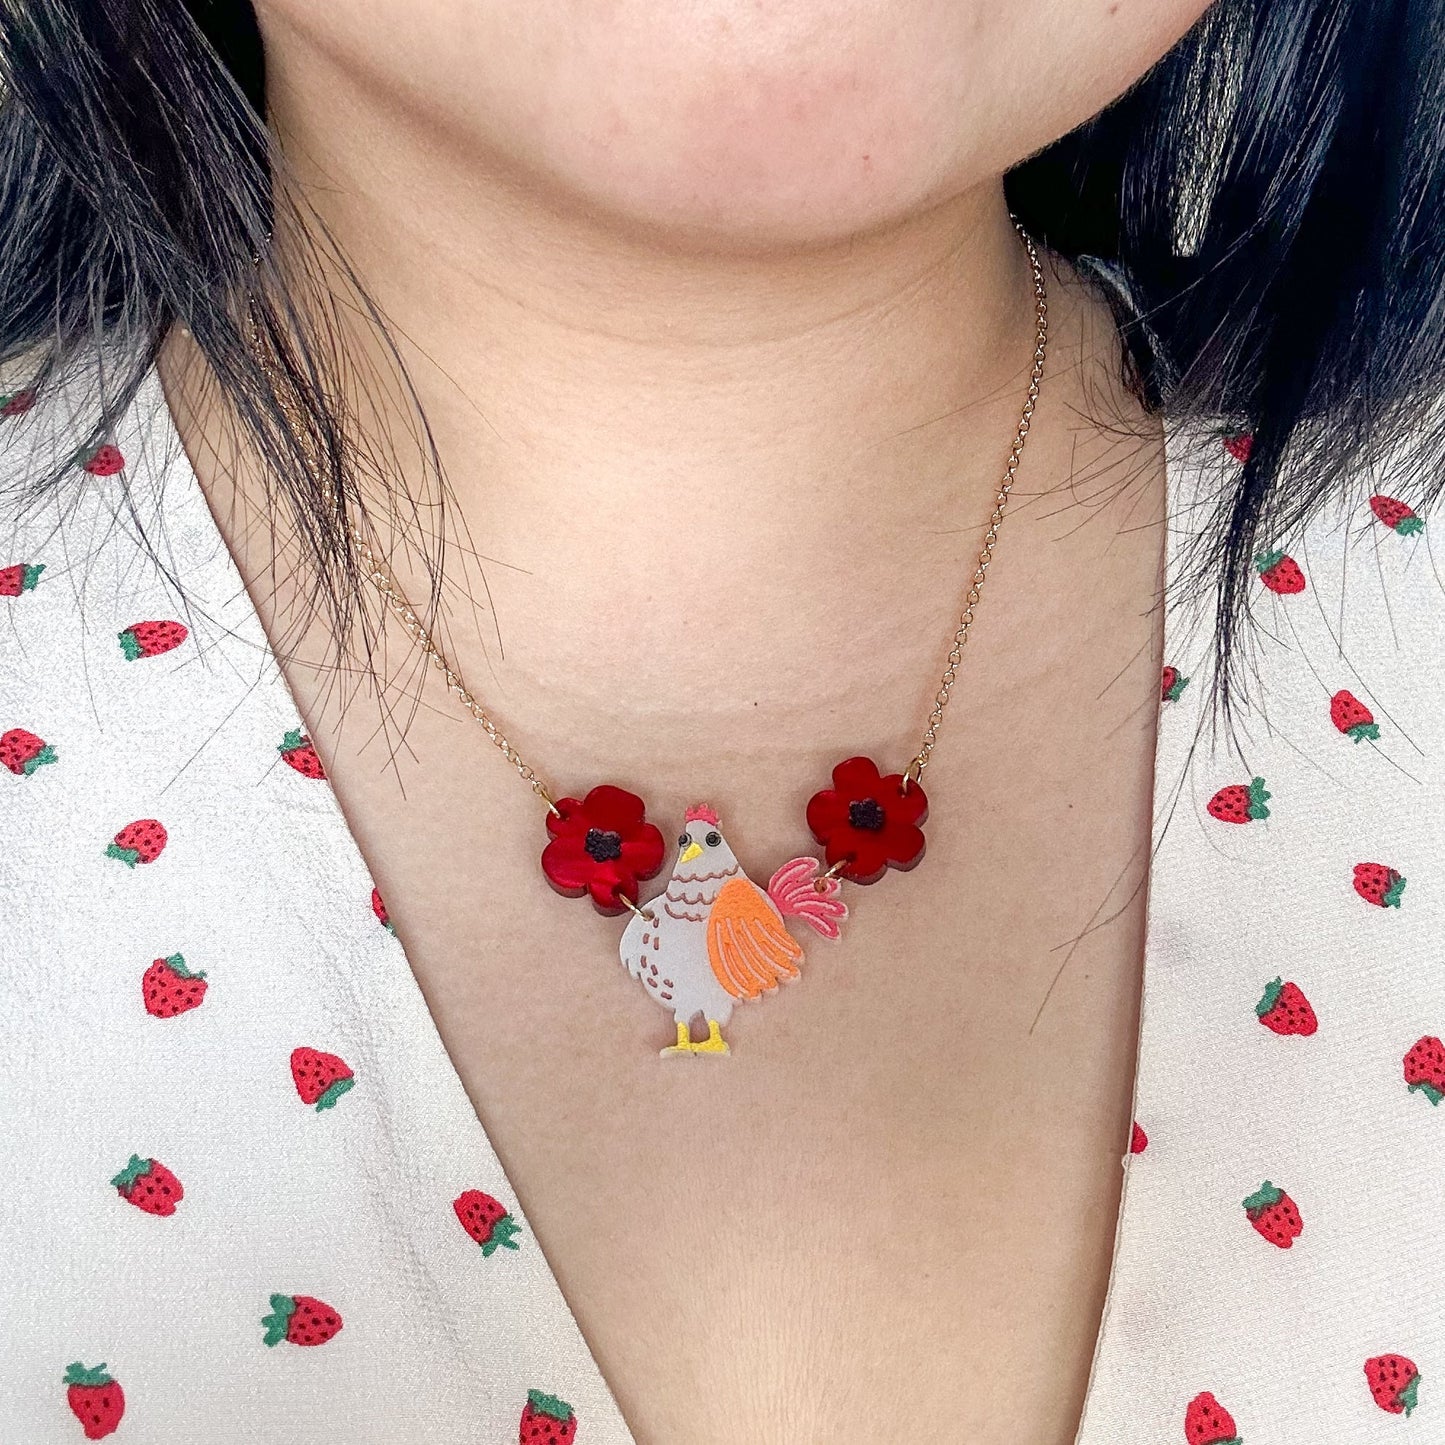 Chicken Necklace//Animal Necklace//Statement Necklace//Acrylic Necklace//Cute Spring Necklace//Animal//Cute Necklace//Gift for Her